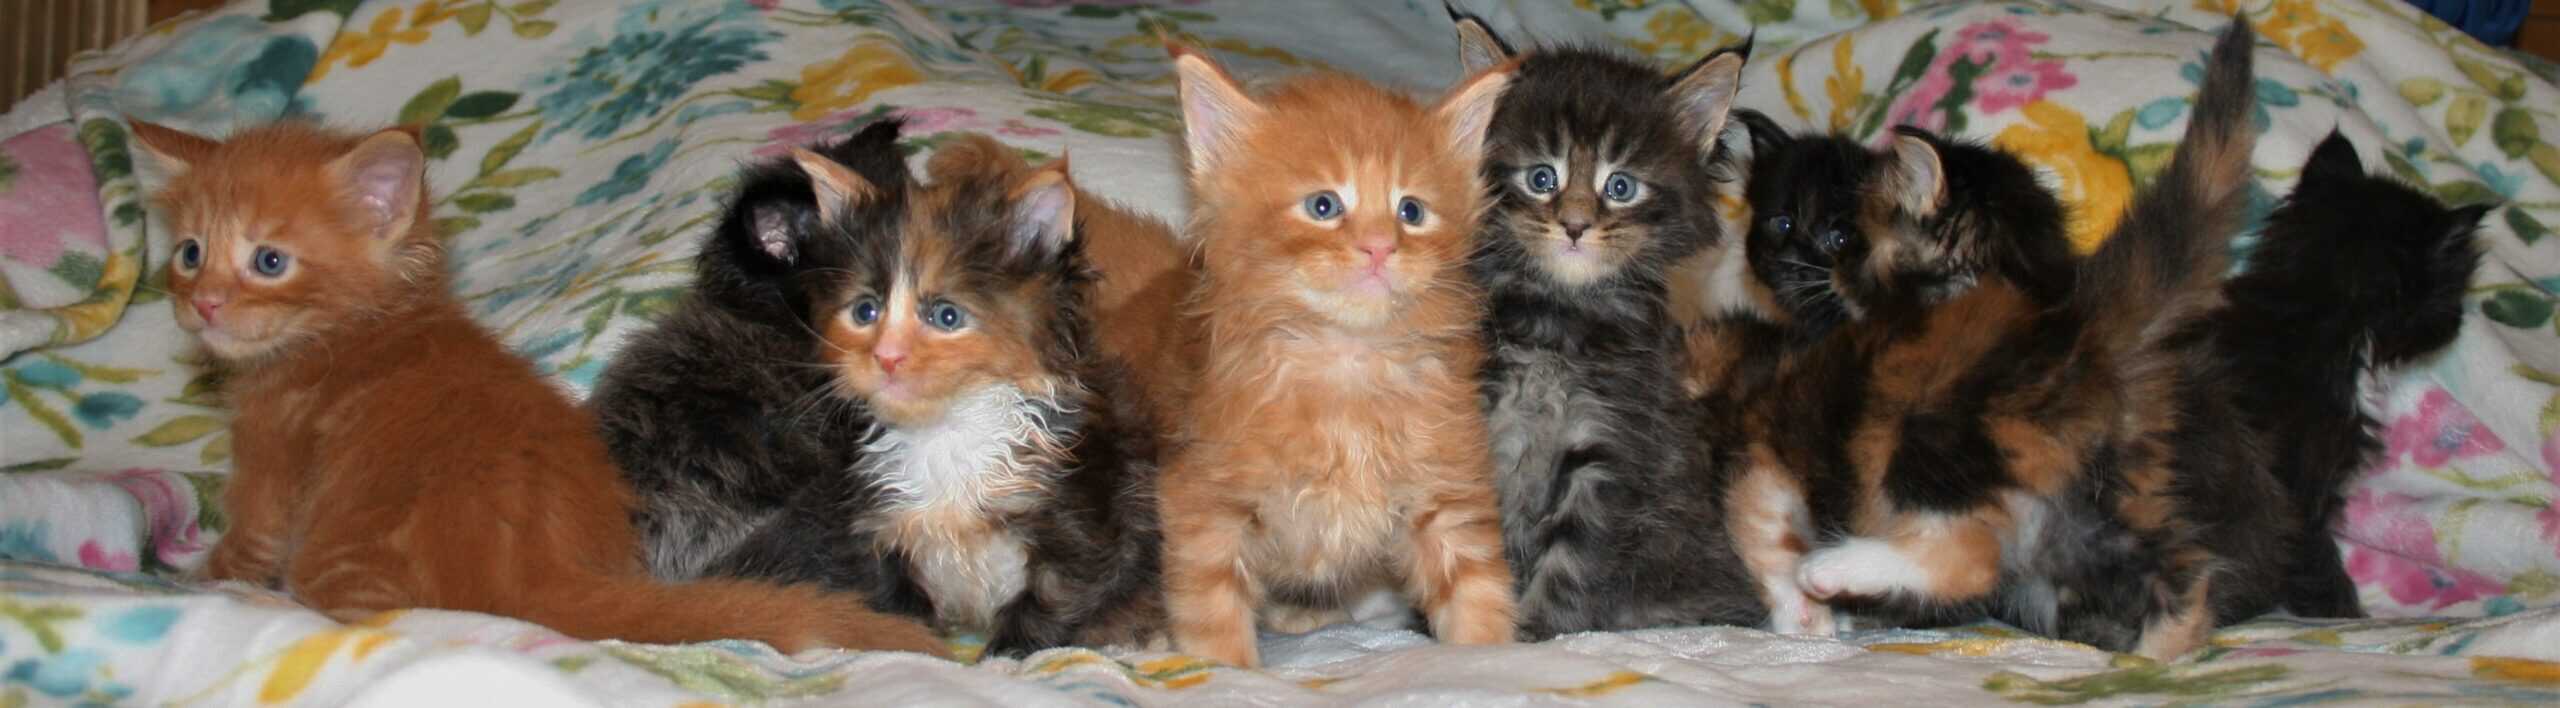 Champion TICA Registered Maine Coon Kittens Breede